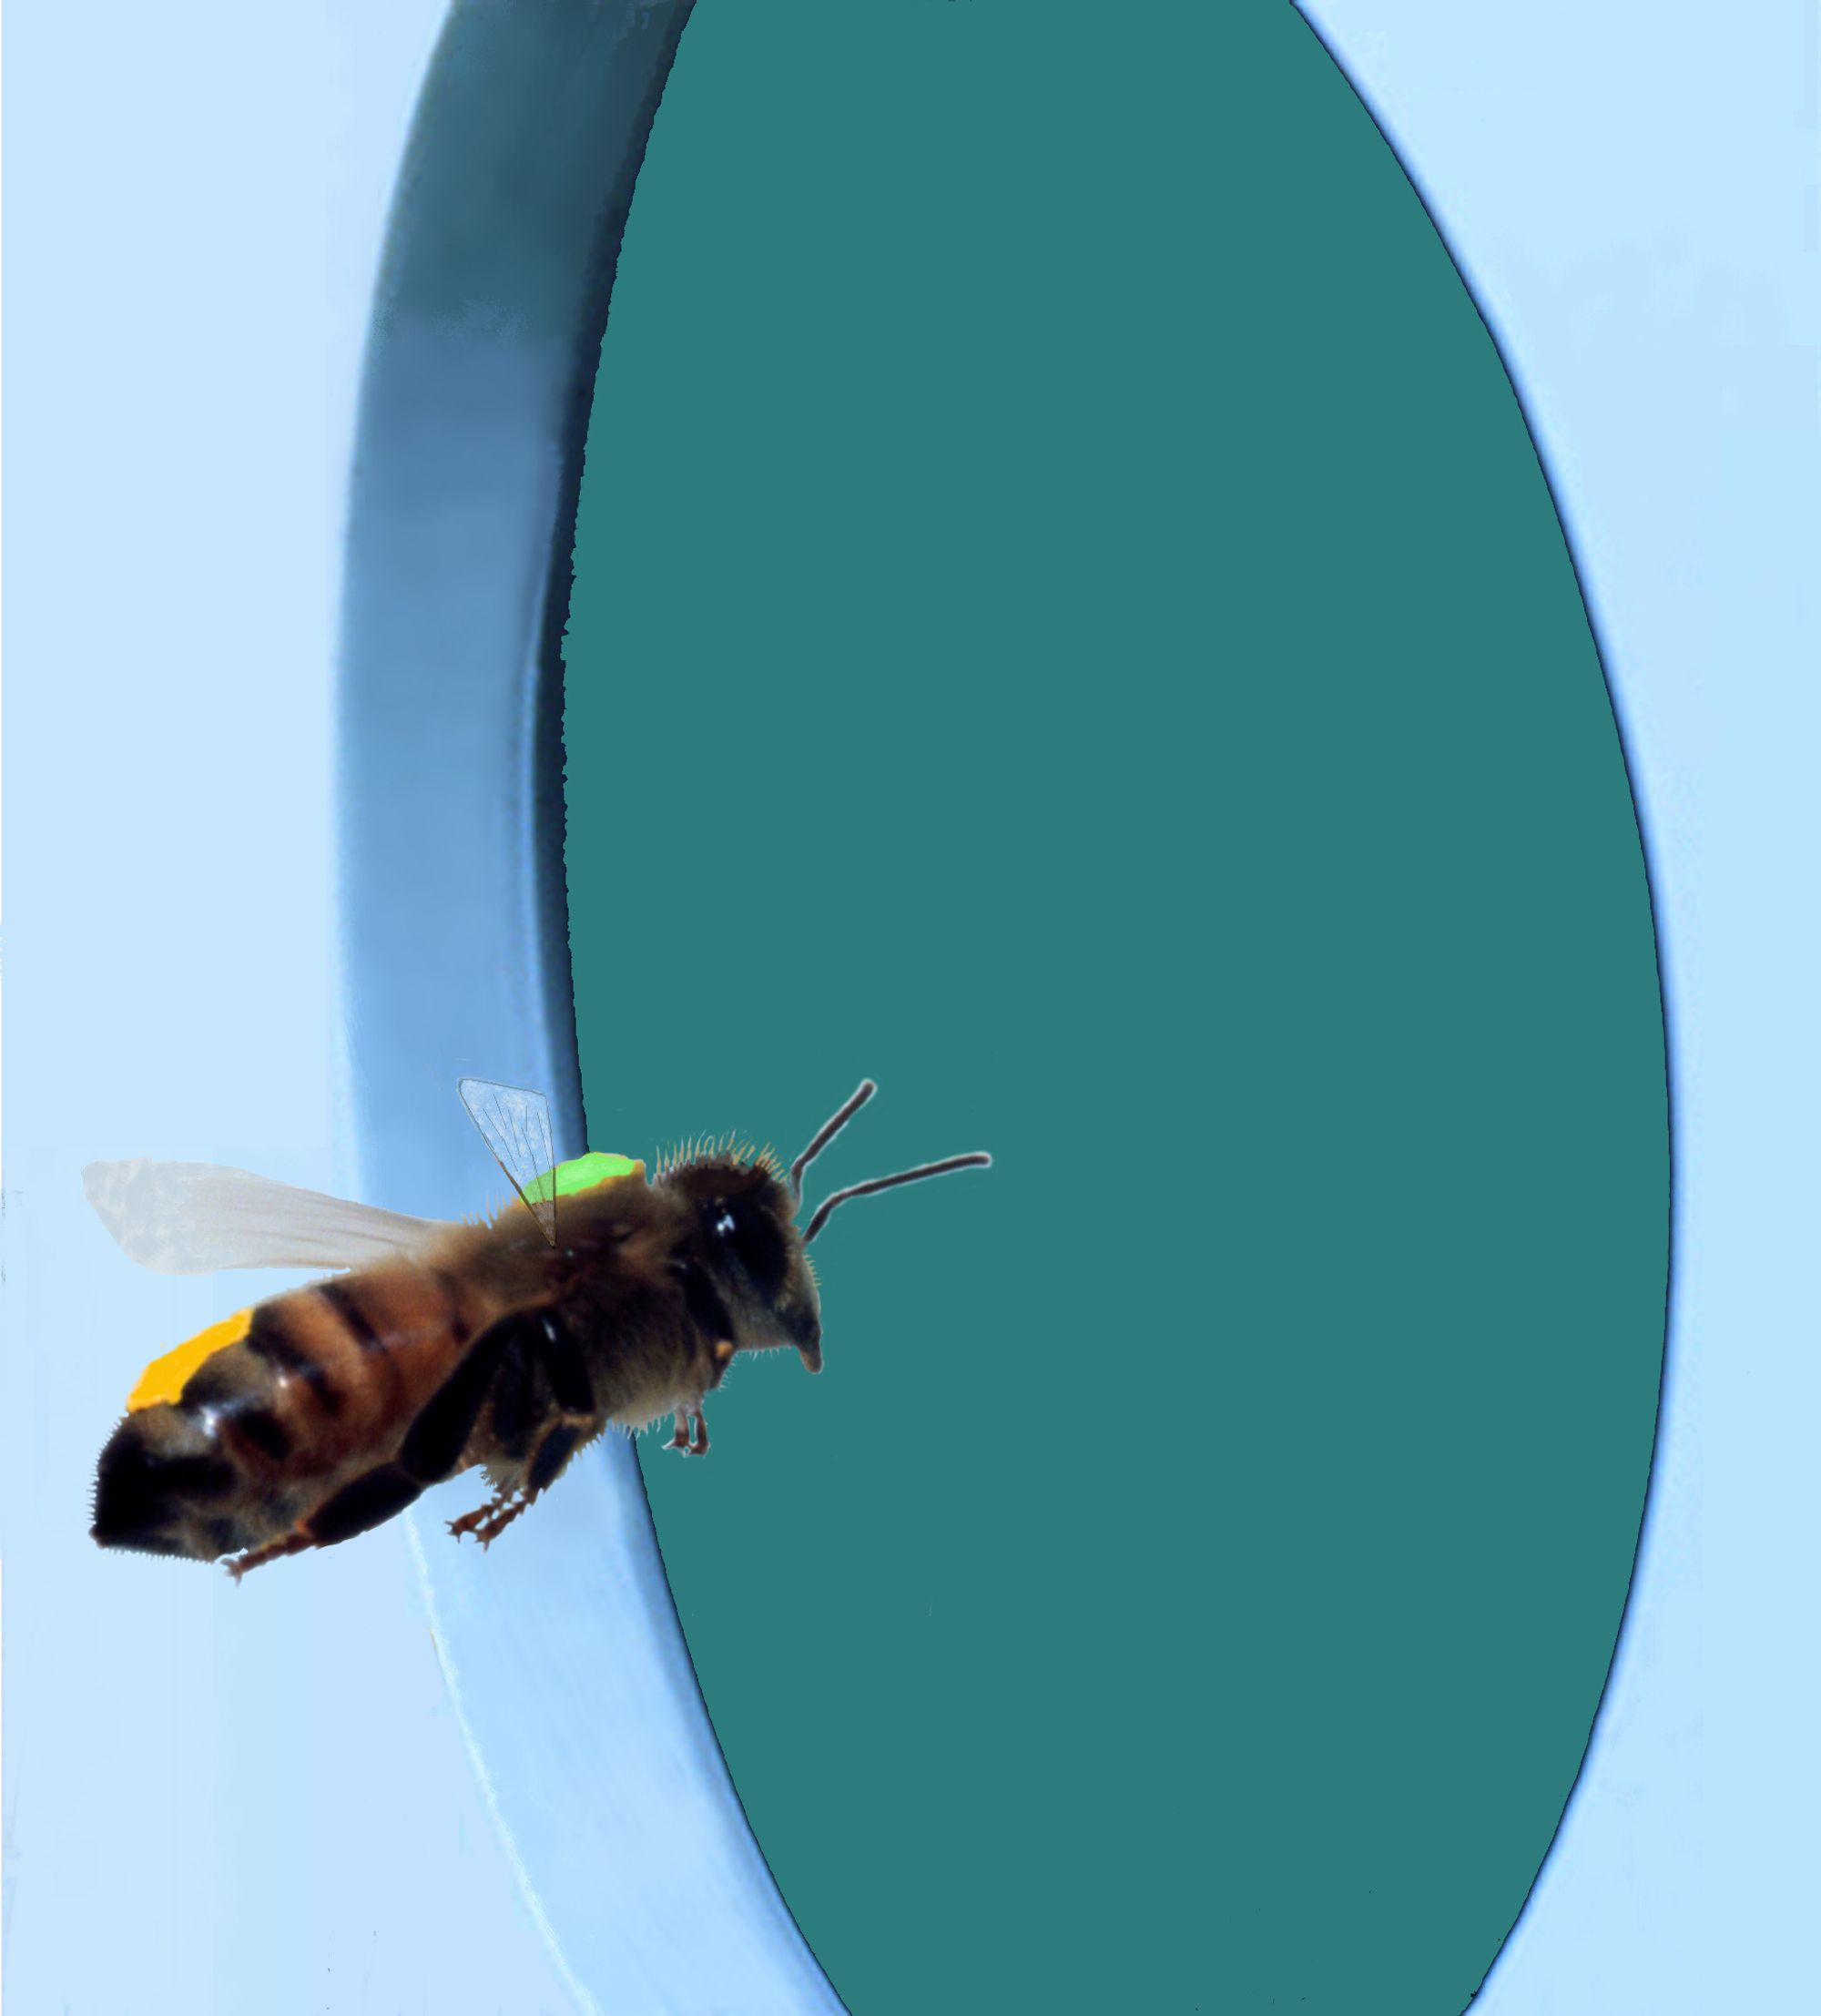 A bee flying through a hole in the wall